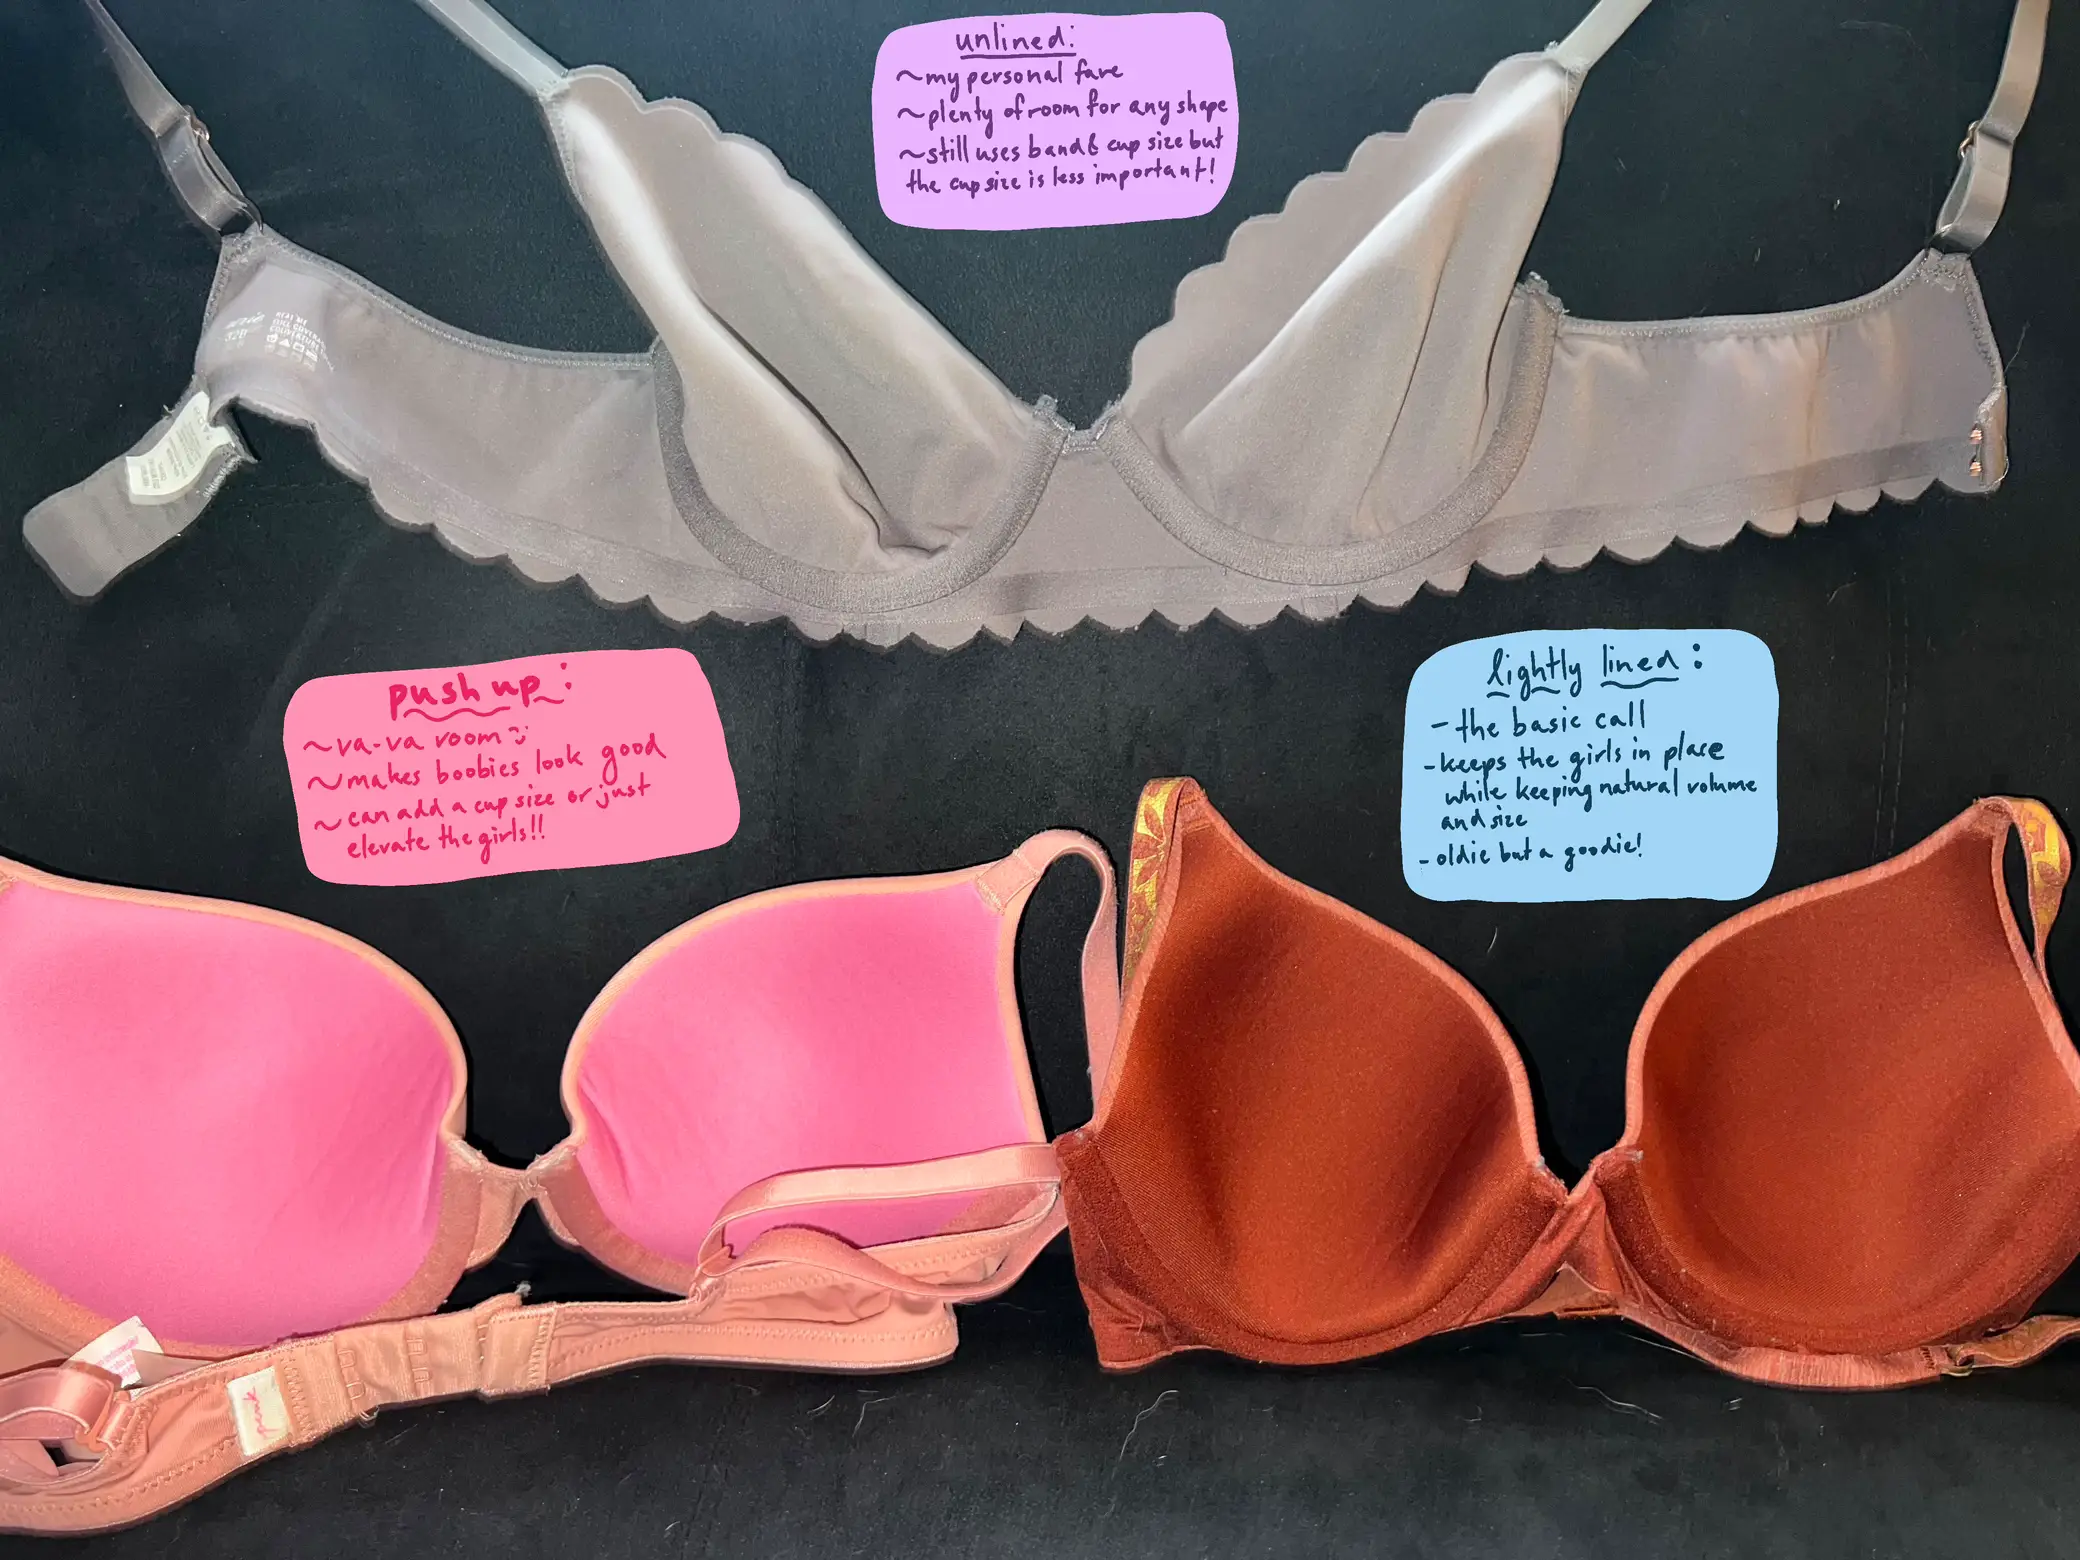 Let's talk bras babes 🩷, Gallery posted by ani